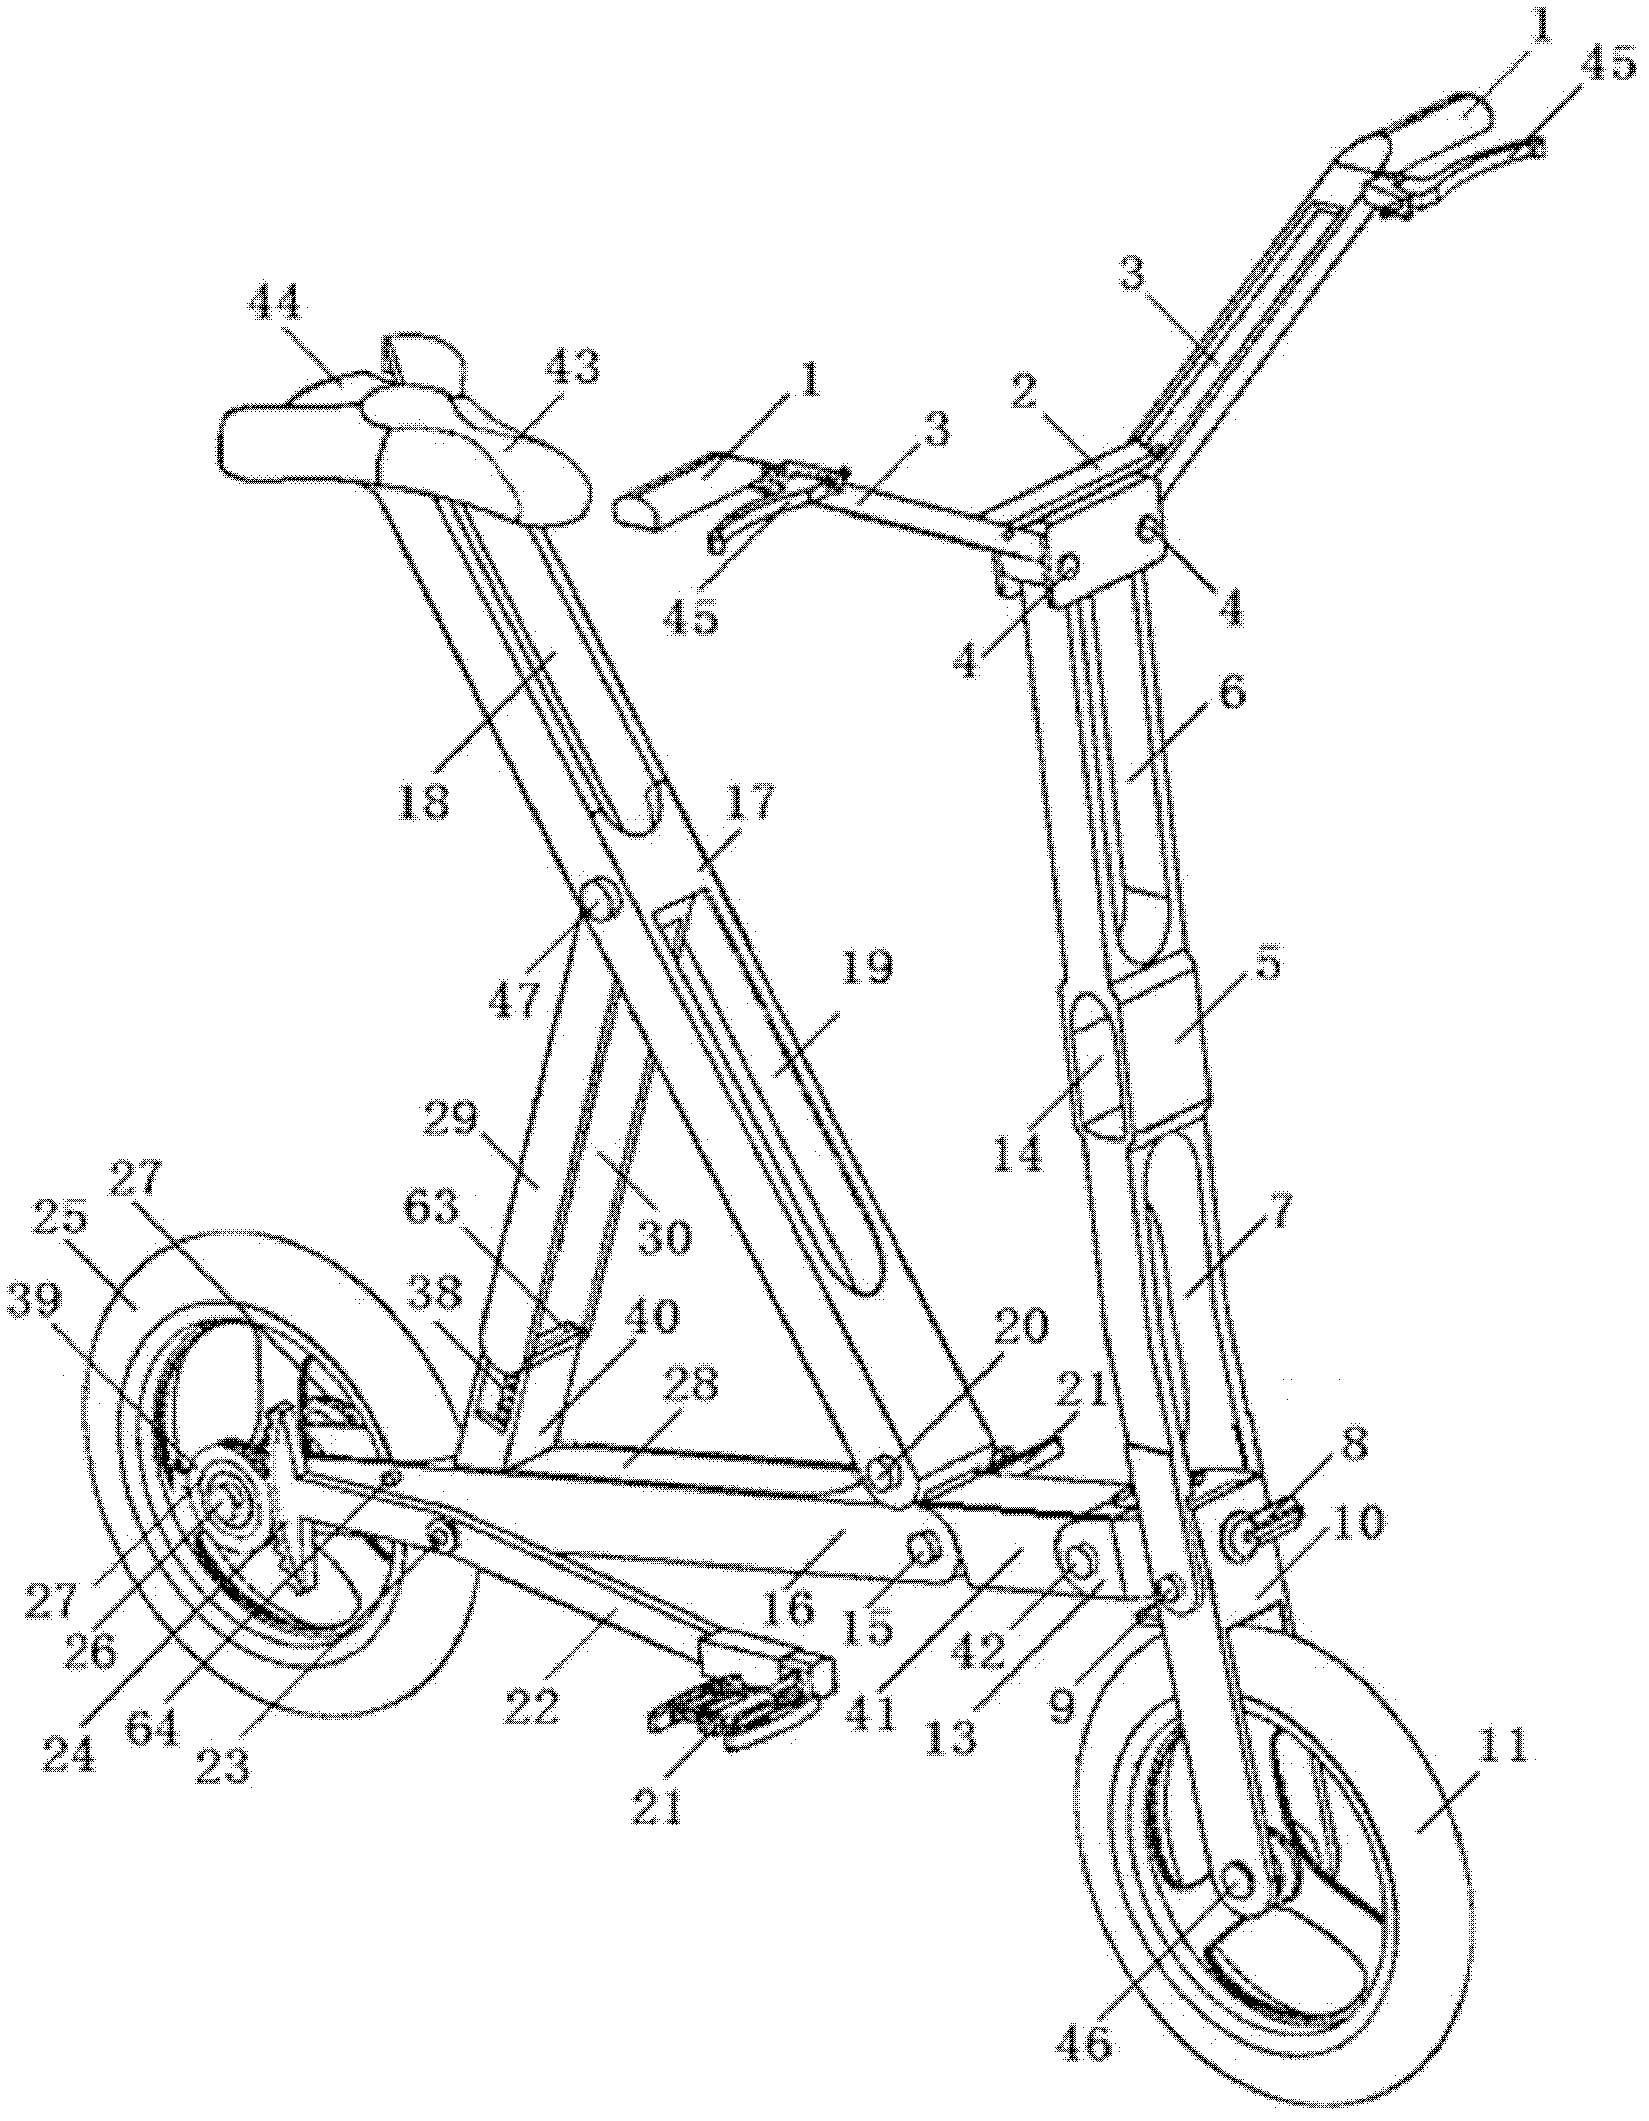 Portable bicycle